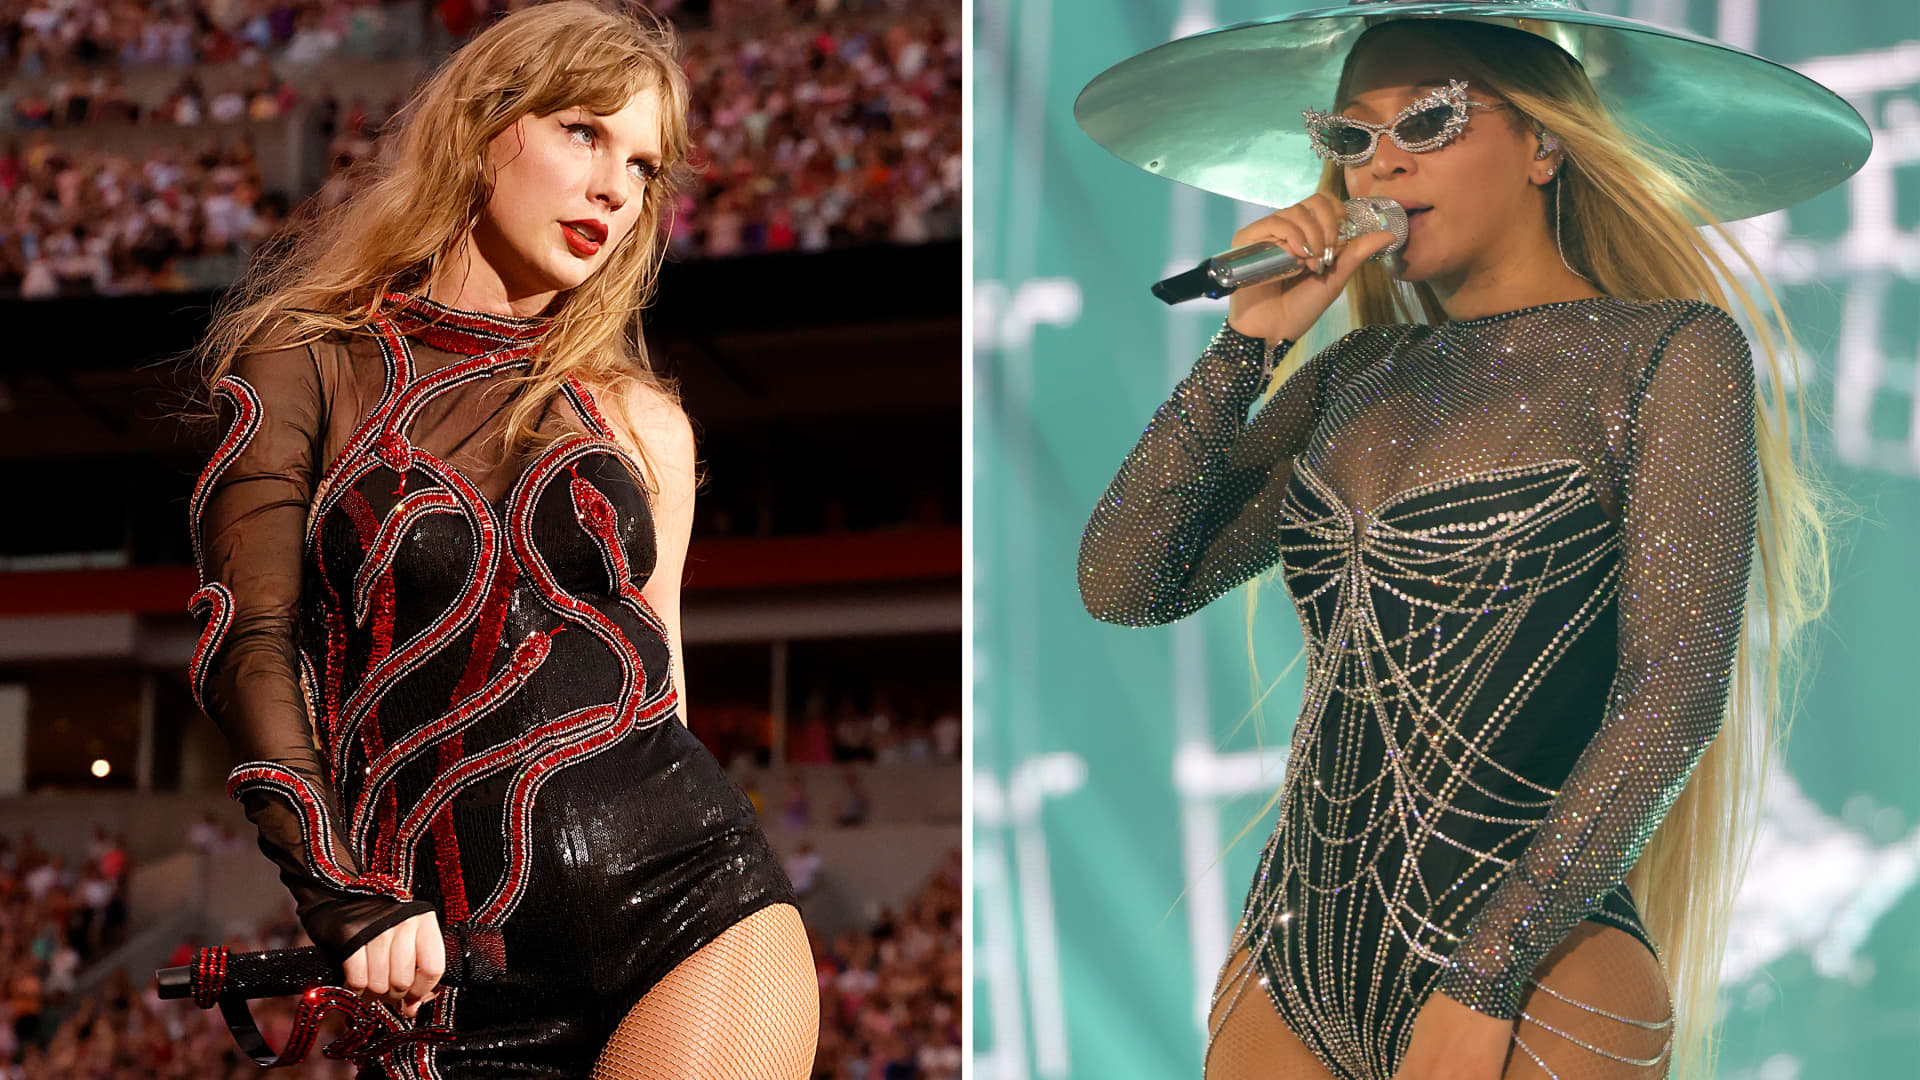 All of AMC's revenue growth came from Taylor Swift and BeyoncÃ© films, theater chain says